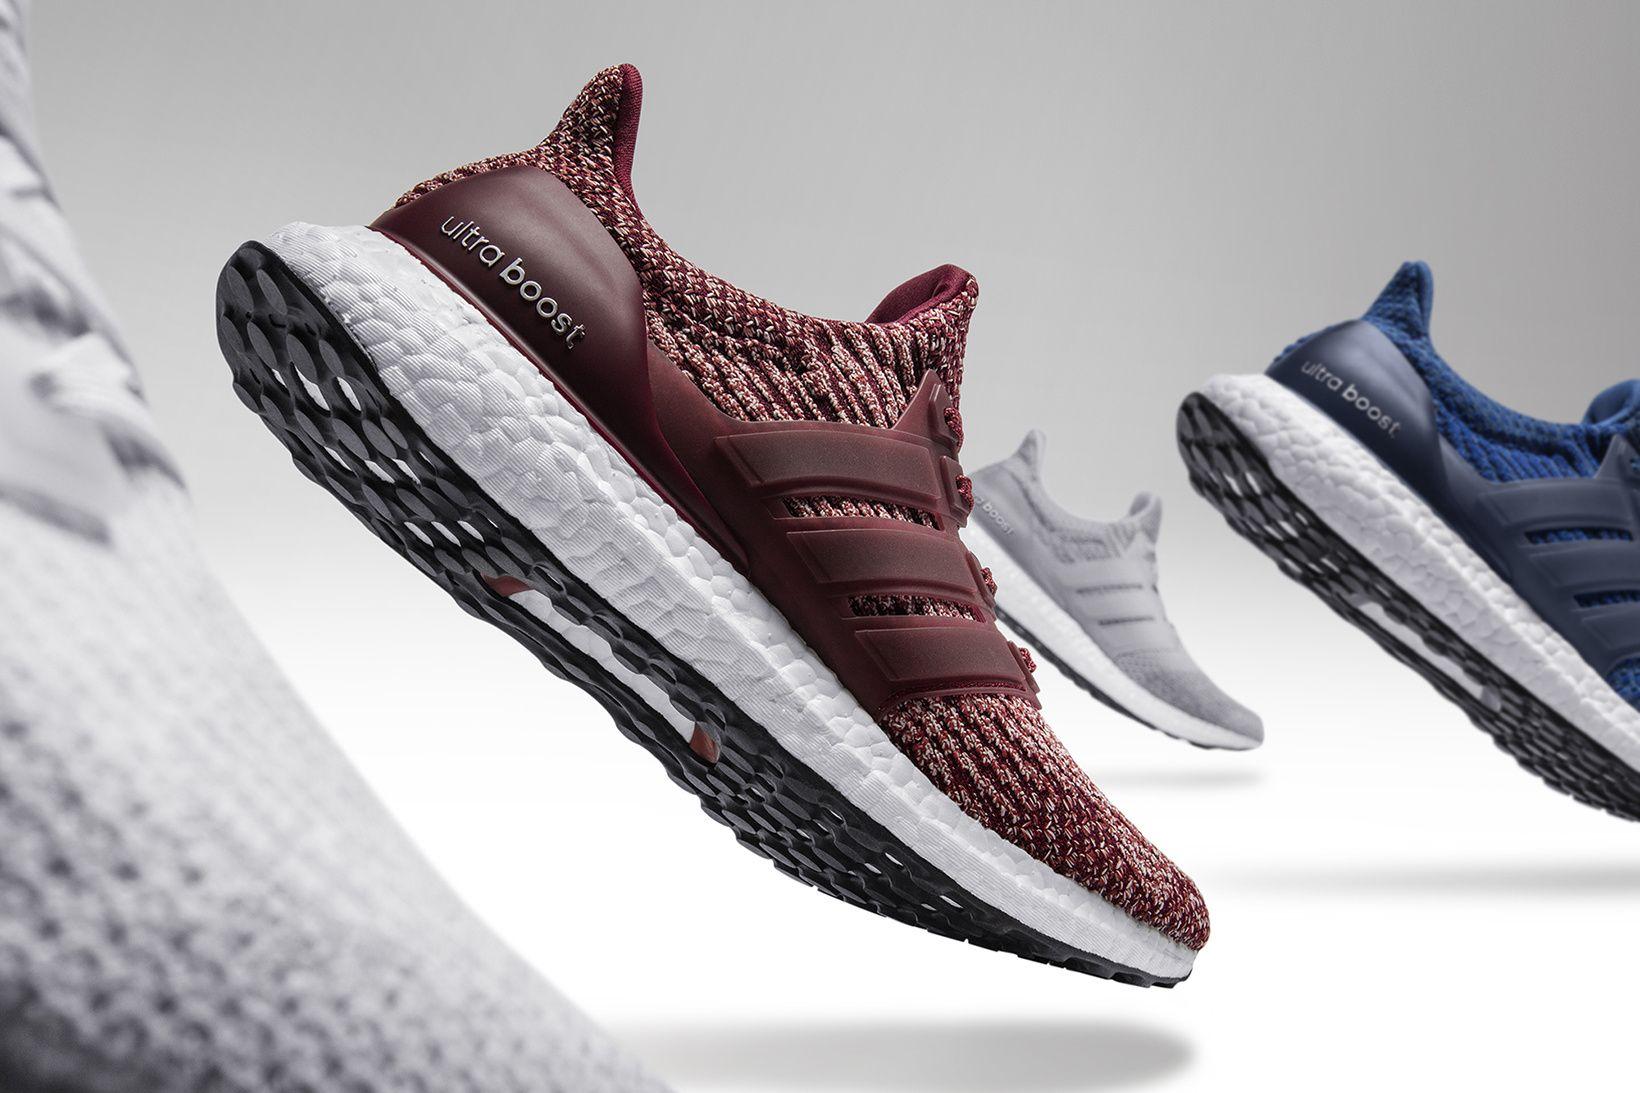 adidas Officially Introduces the UltraBOOST 3.0